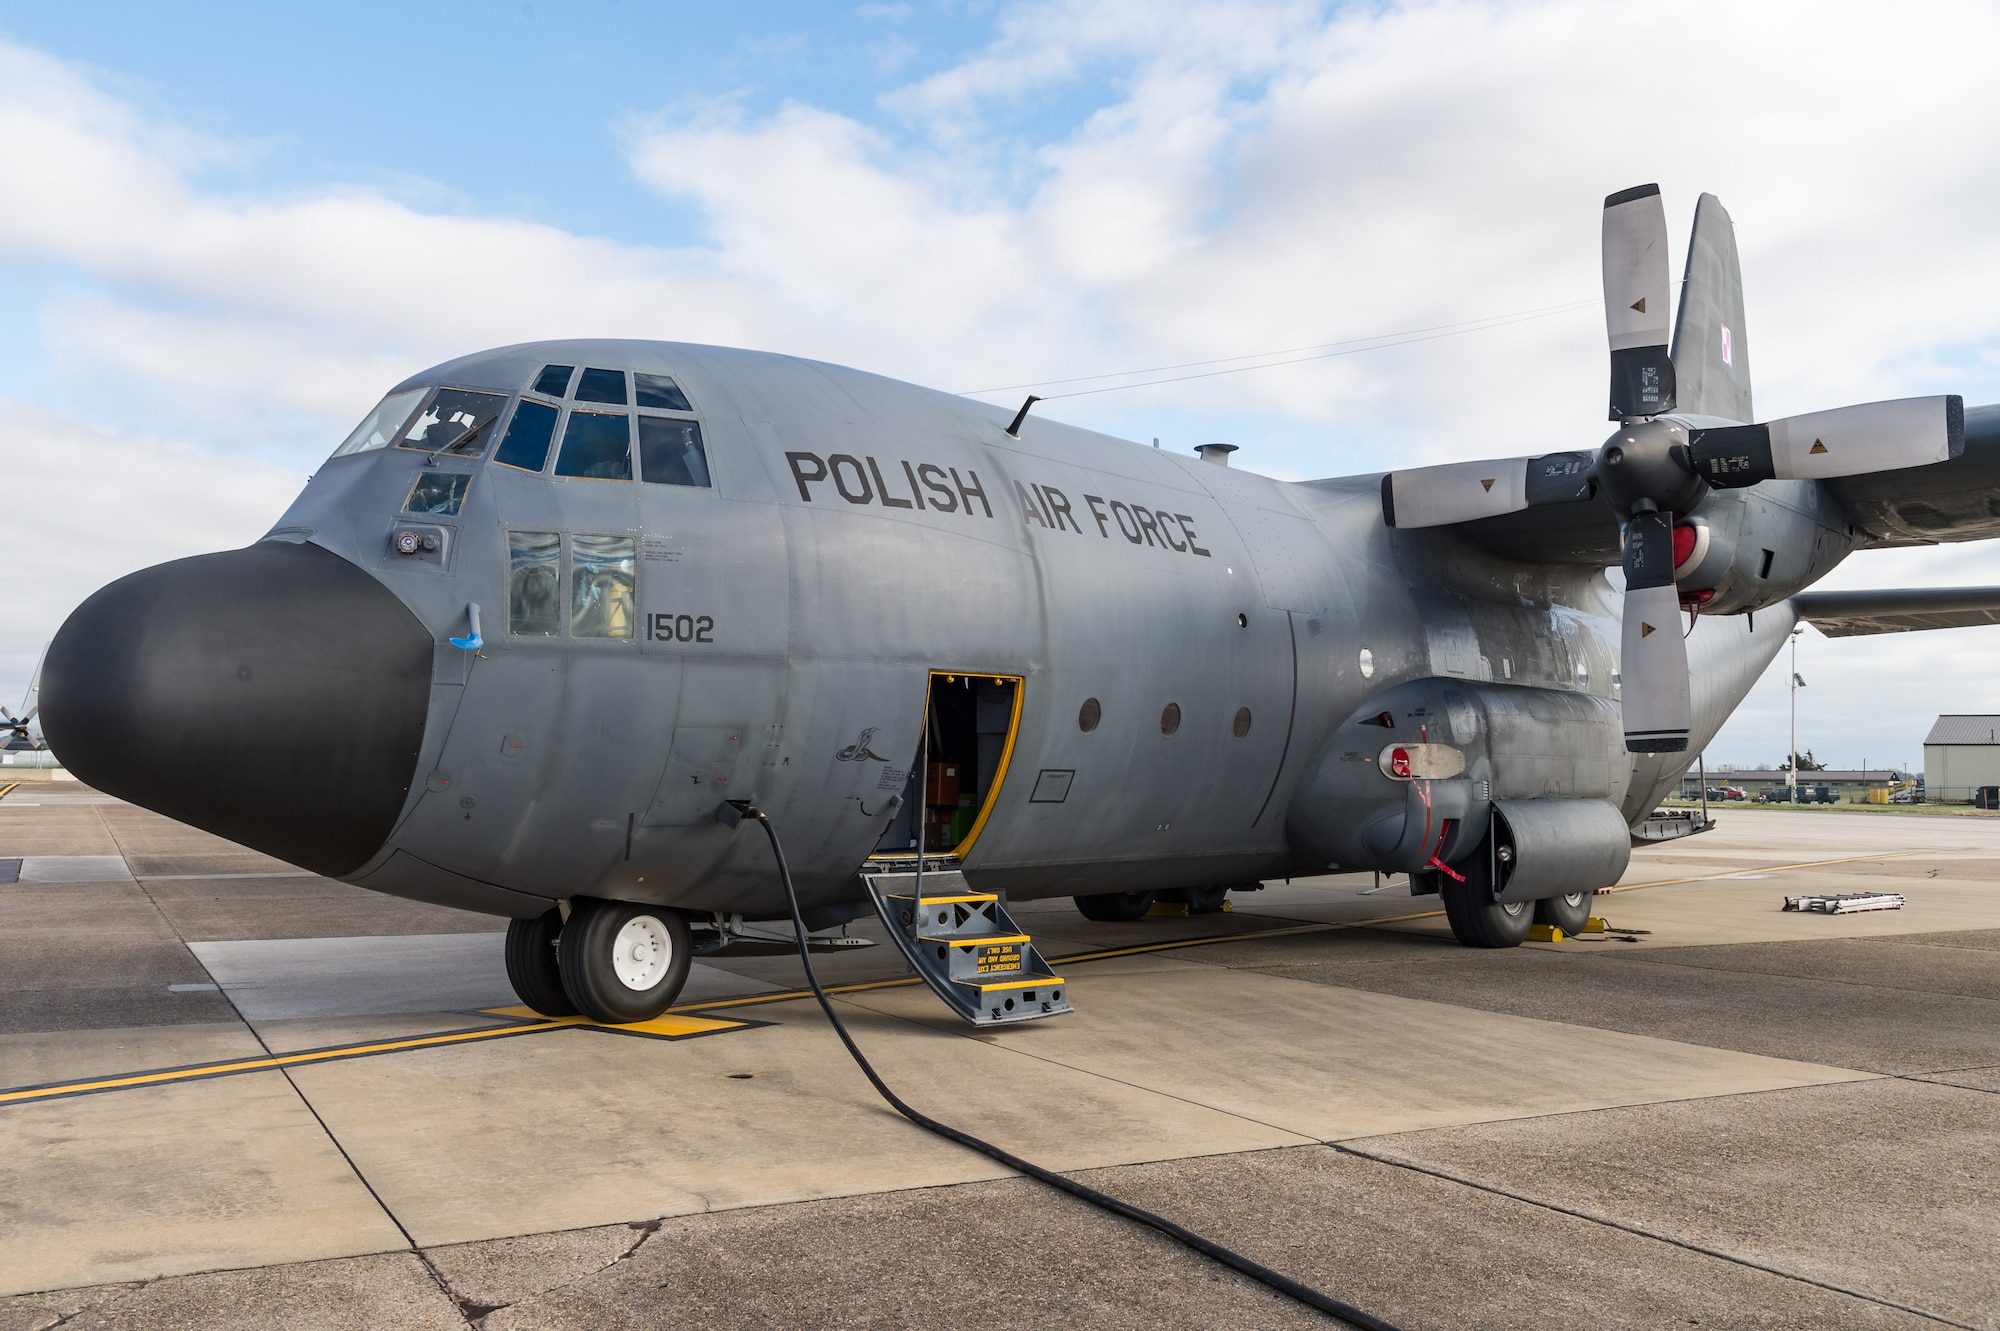 A Polish air force C-130E Hercules is parked on the flight line after delivering cargo Dec. 17, 2020, at Dover Air Force Base, Delaware, as part of a foreign military sales mission. The United States and Poland have enjoyed warm bilateral relations since 1989. Poland is a stalwart NATO ally, and both the U.S. and Poland remain committed to the regional security and prosperity of Europe. Due to its strategic location, Dover AFB supports approximately $3.5 billion worth of foreign military sales annually.  (U.S. Air Force photo by Roland Balik)